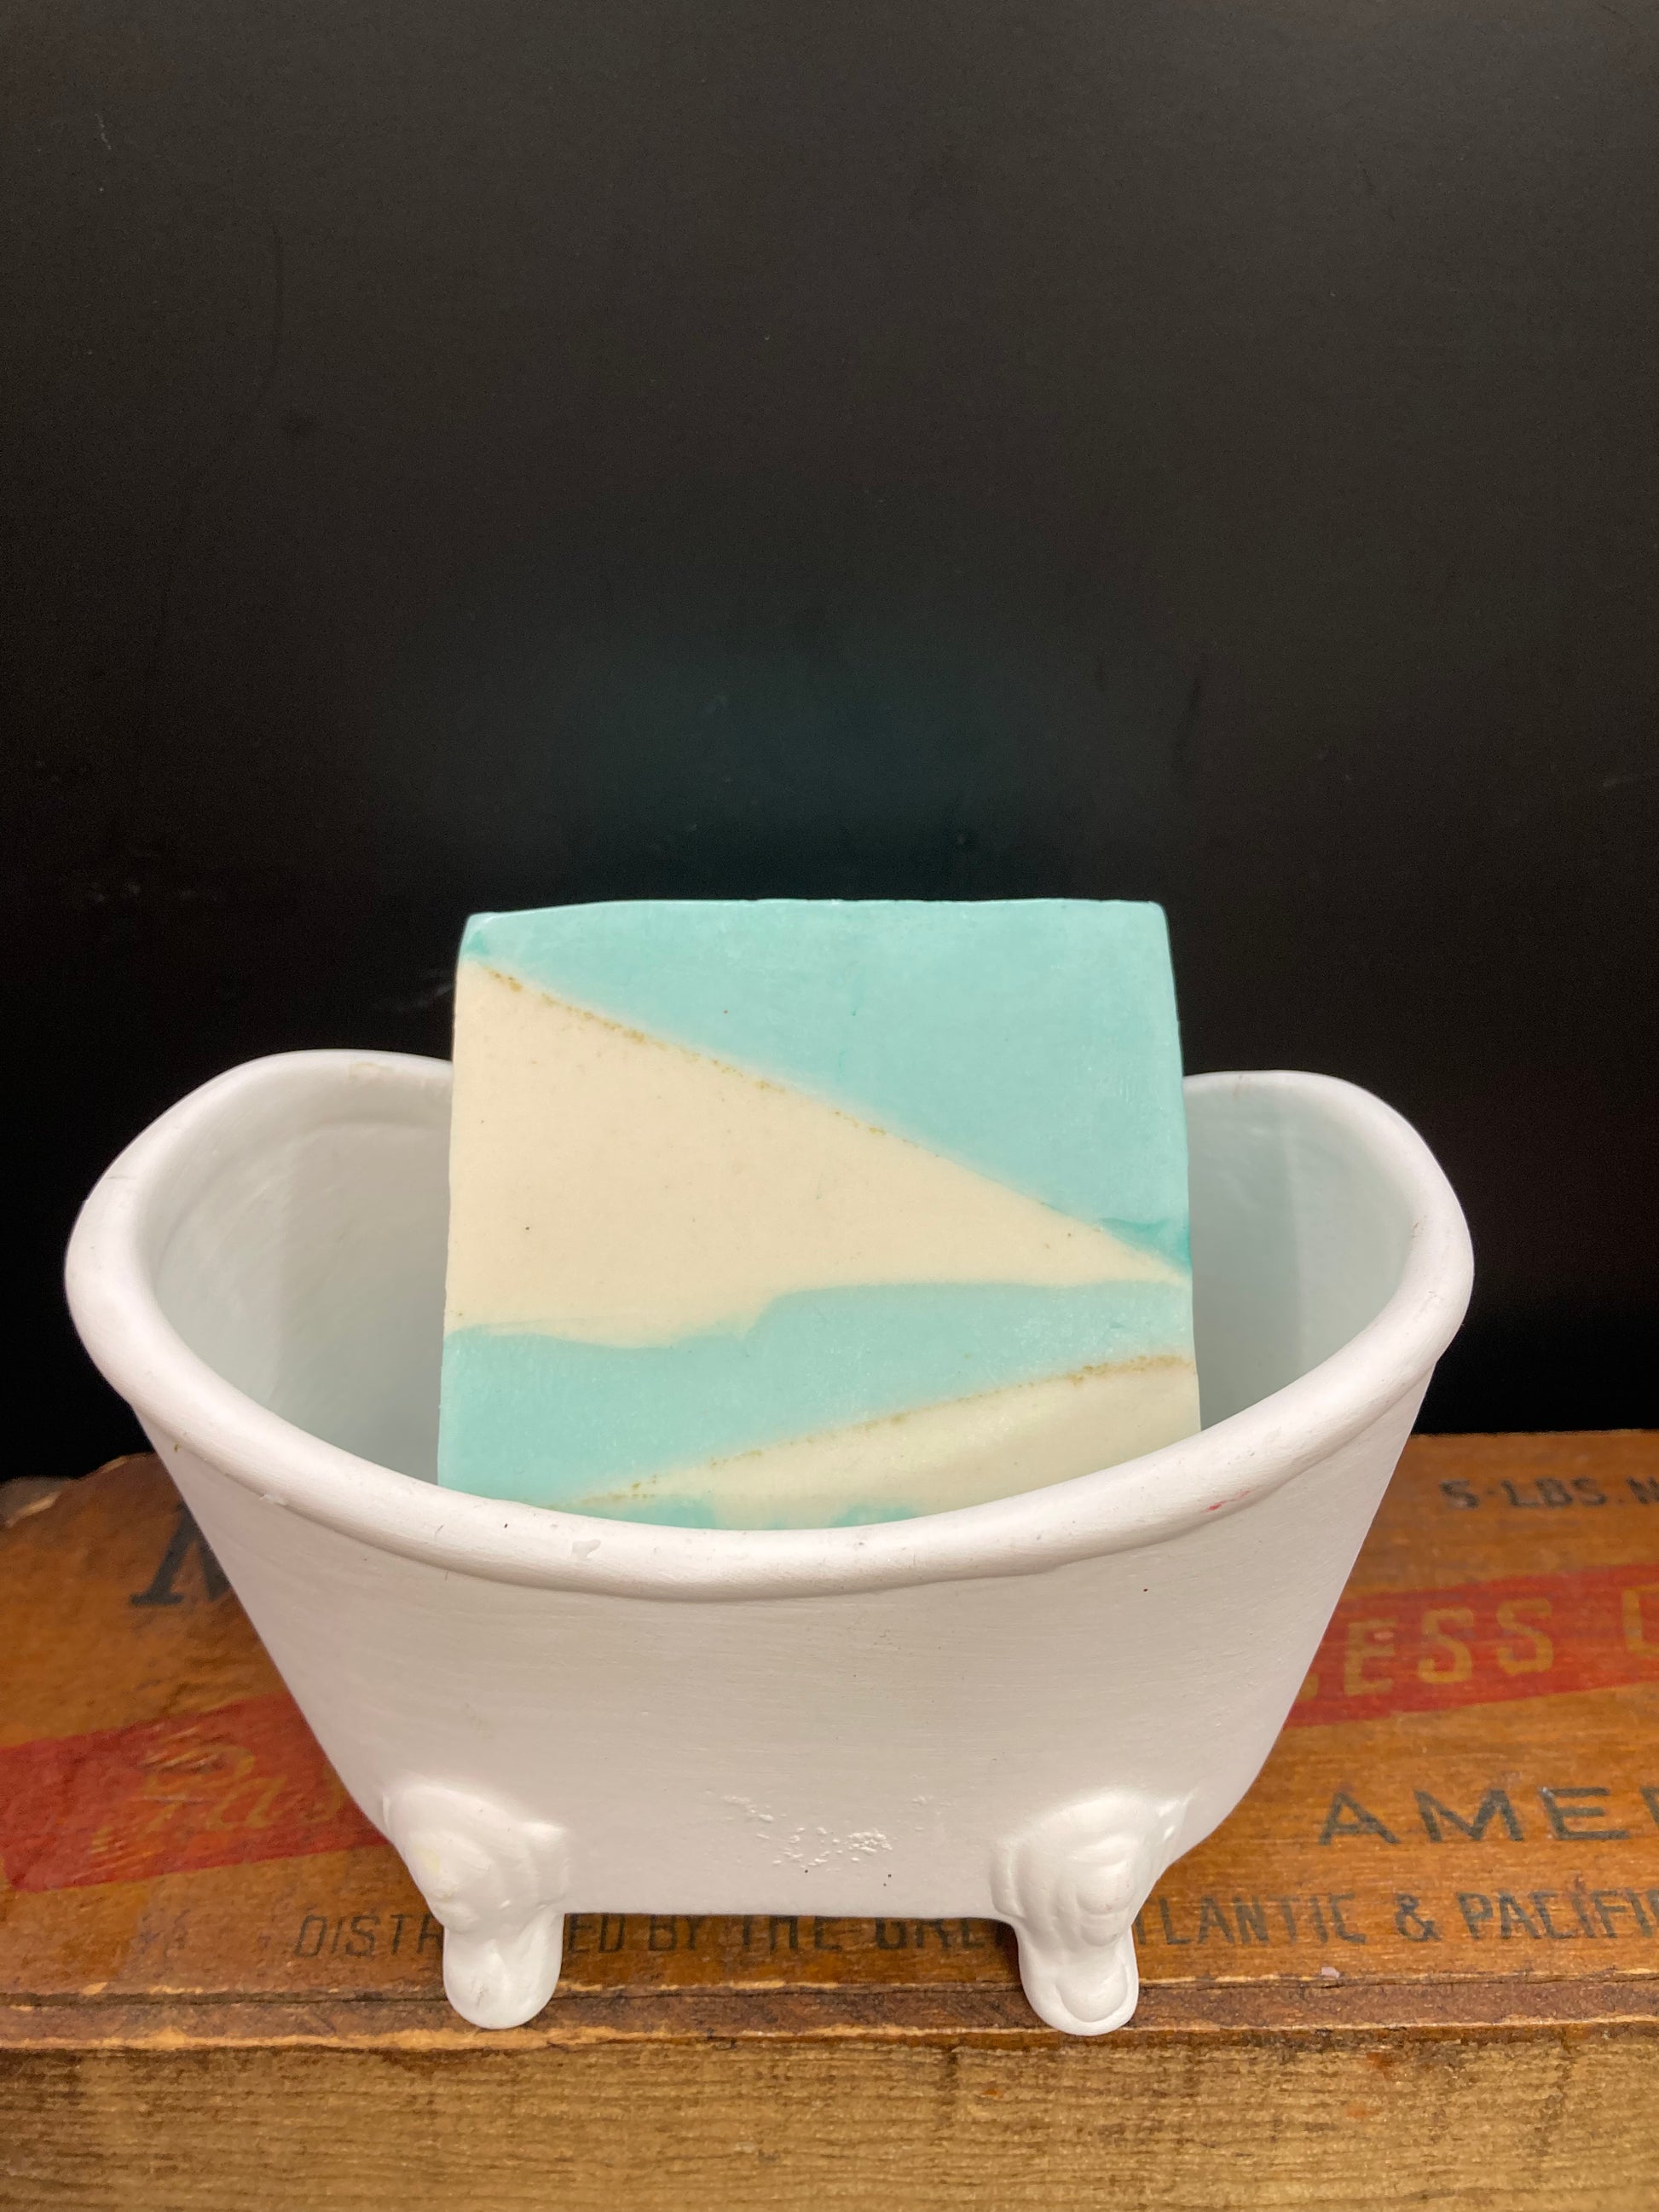  This is a 4 oz bar of Cranberry  scented Goats Milk Soap.  This is a classic scent in a moisturizing bar of soap.  It makes bathtime a spa-like experience!    Each item is individually made and may appear different from the photo.